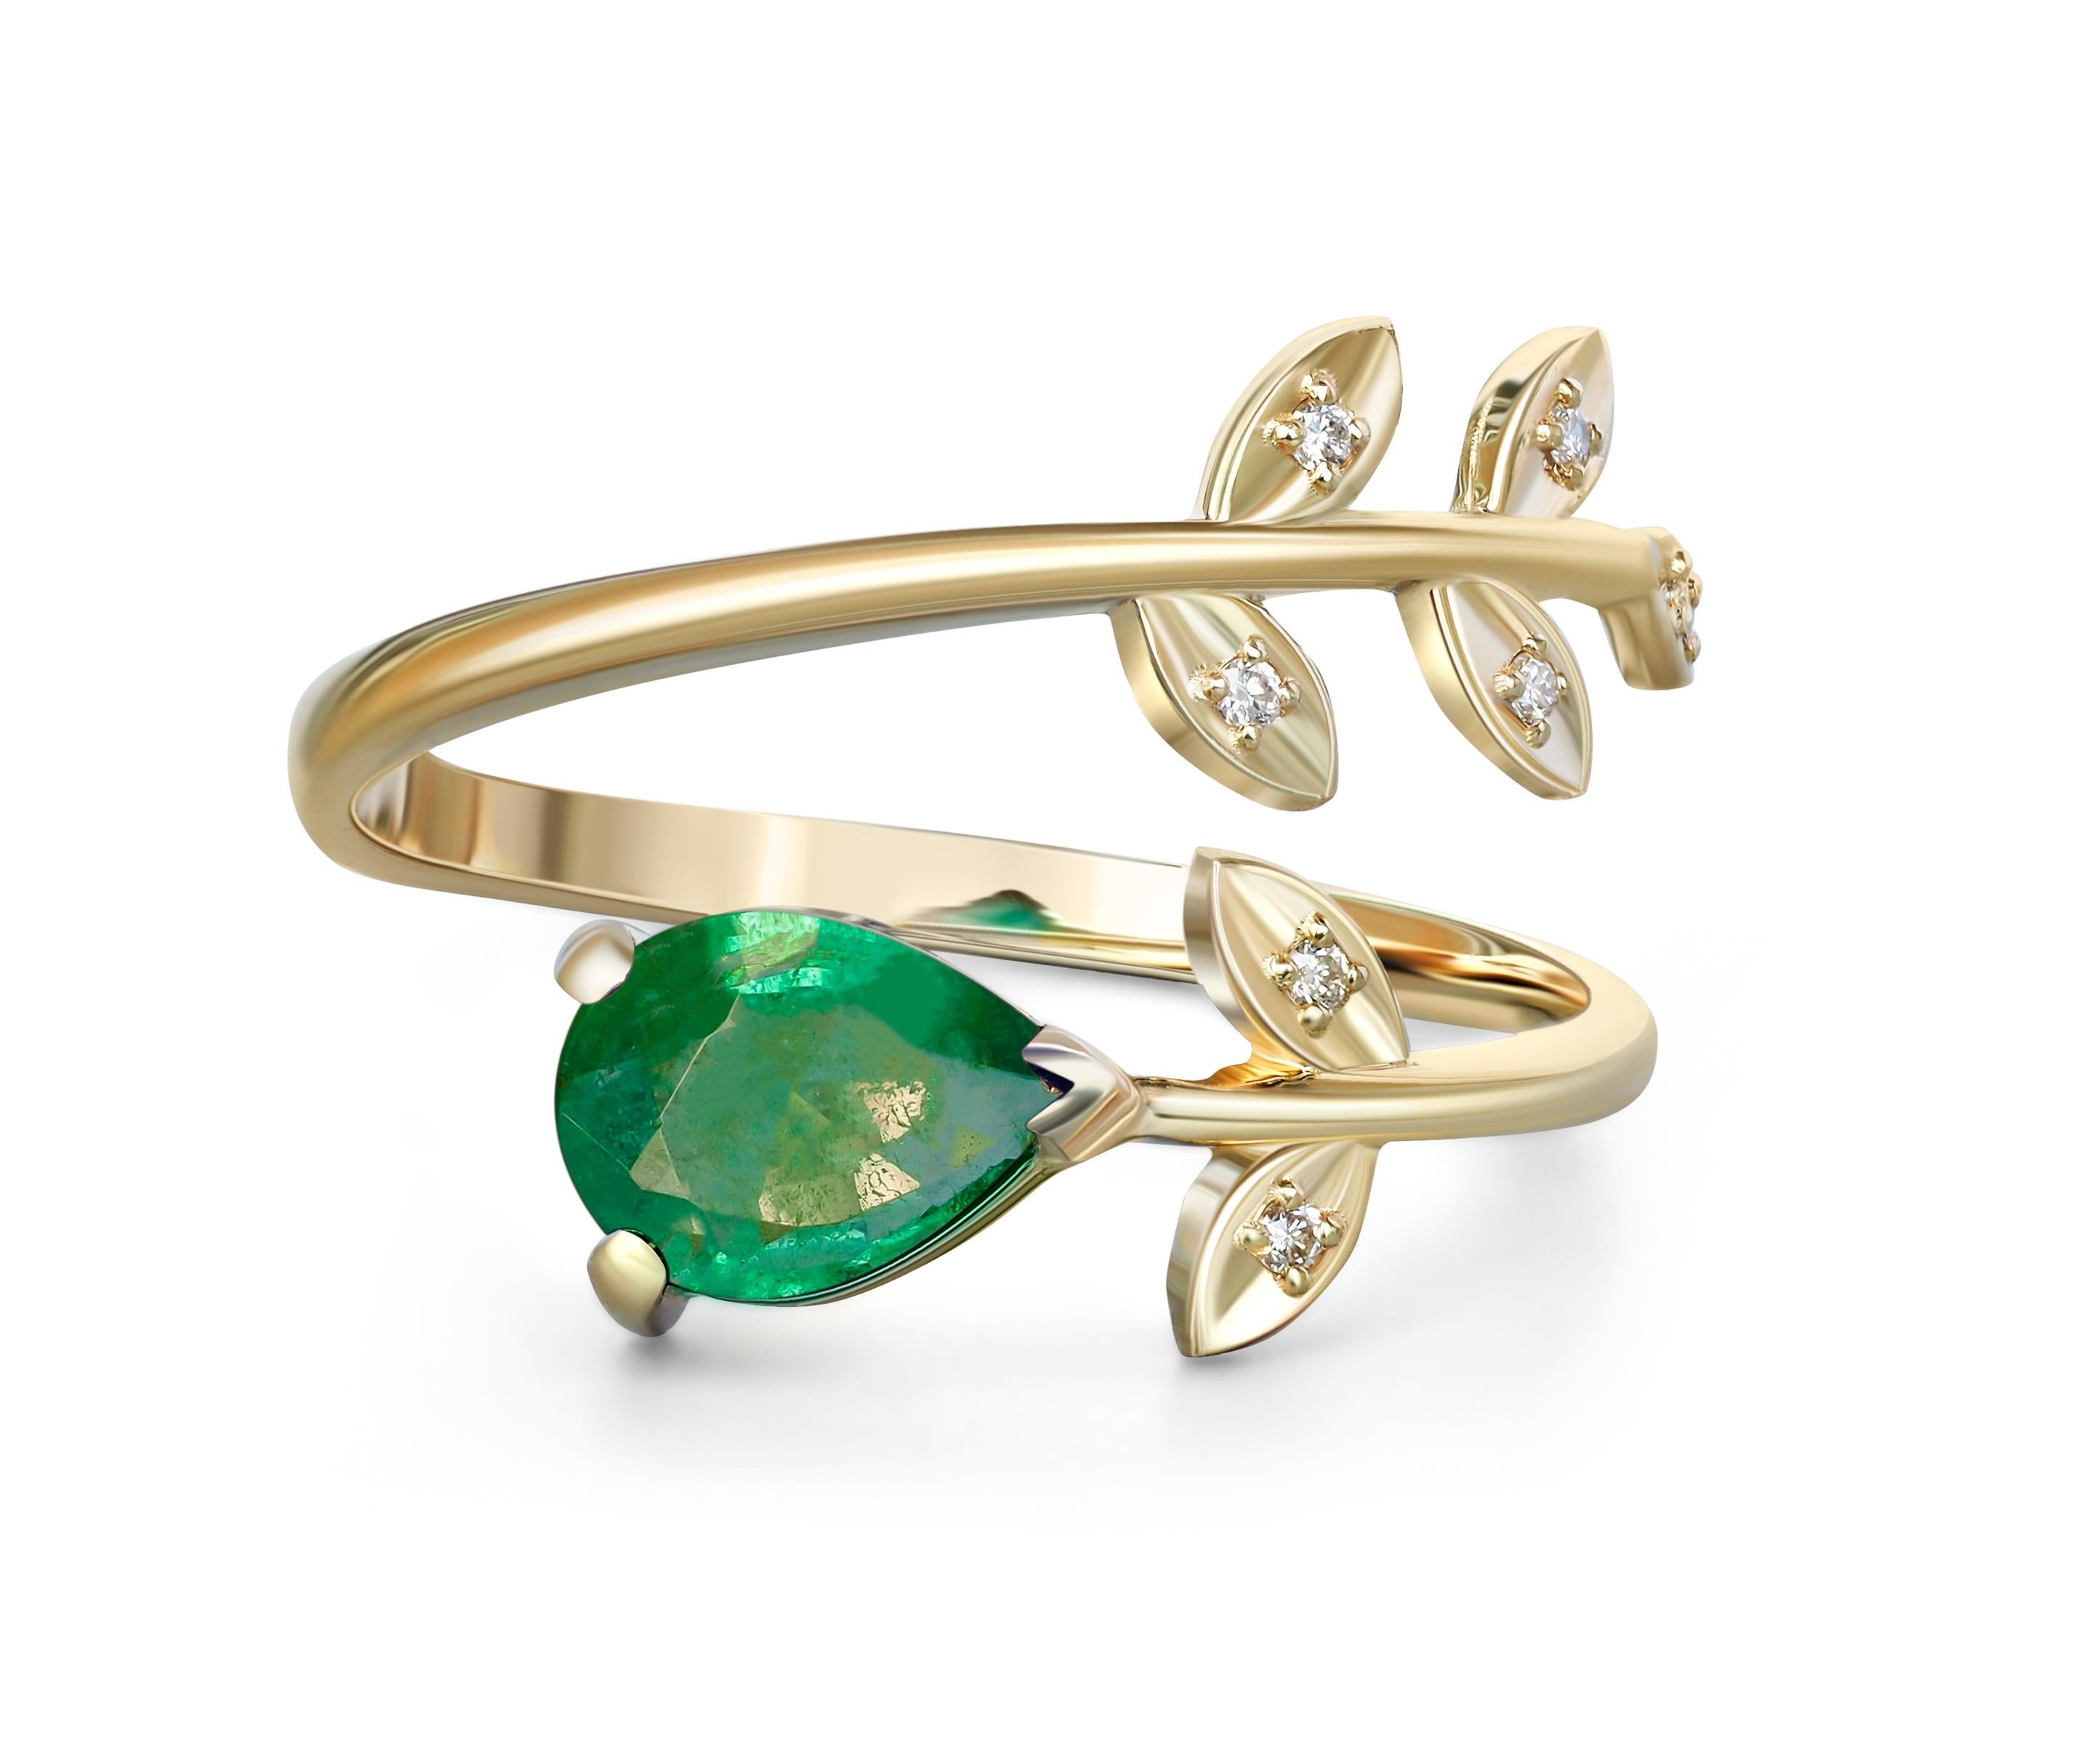 Pear Emerald 14k gold ring. 
Emerald gold ring. Adjustable emerald ring. Gold leaves ring. Emerald leaves ring. Floral gold ring.

Metal: 14 k gold
Weight: 2 g. depends from size.

Set with emerald.
Pear shape, approx 0.8 ct, green color.
Clarity: